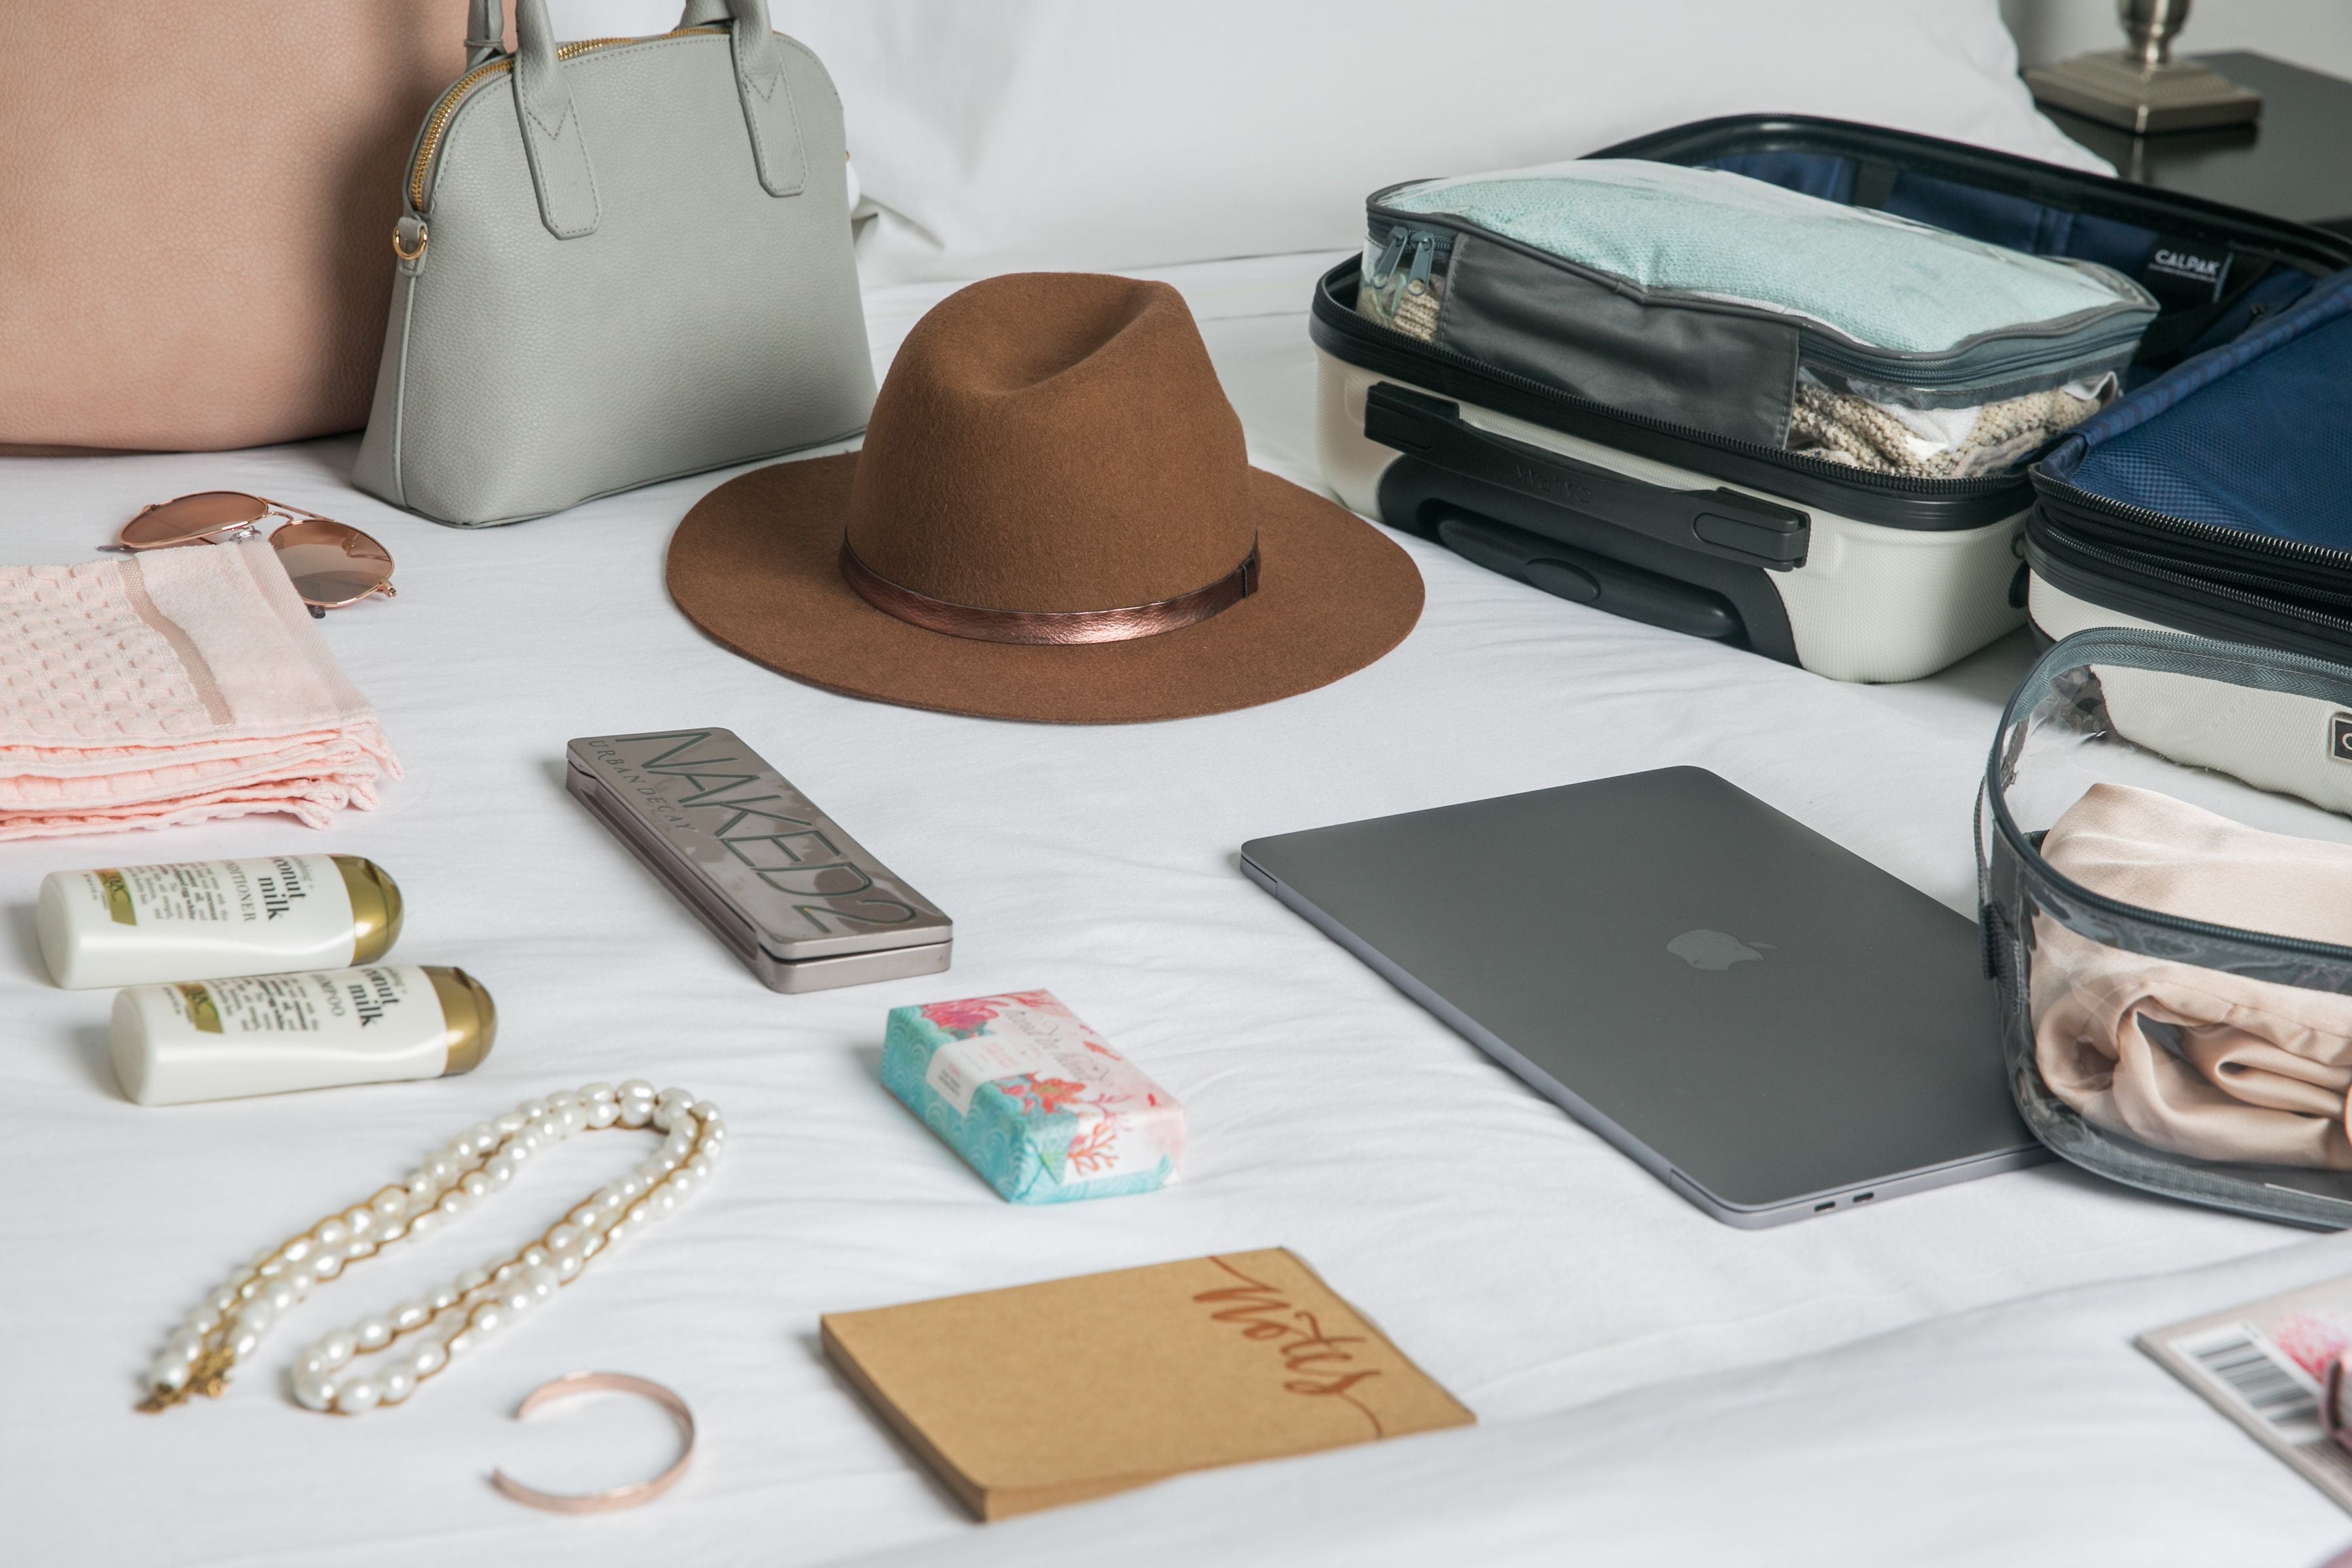 45 Business Travel Accessories You'll Need for Your Next Work Trip + P –  EzPacking